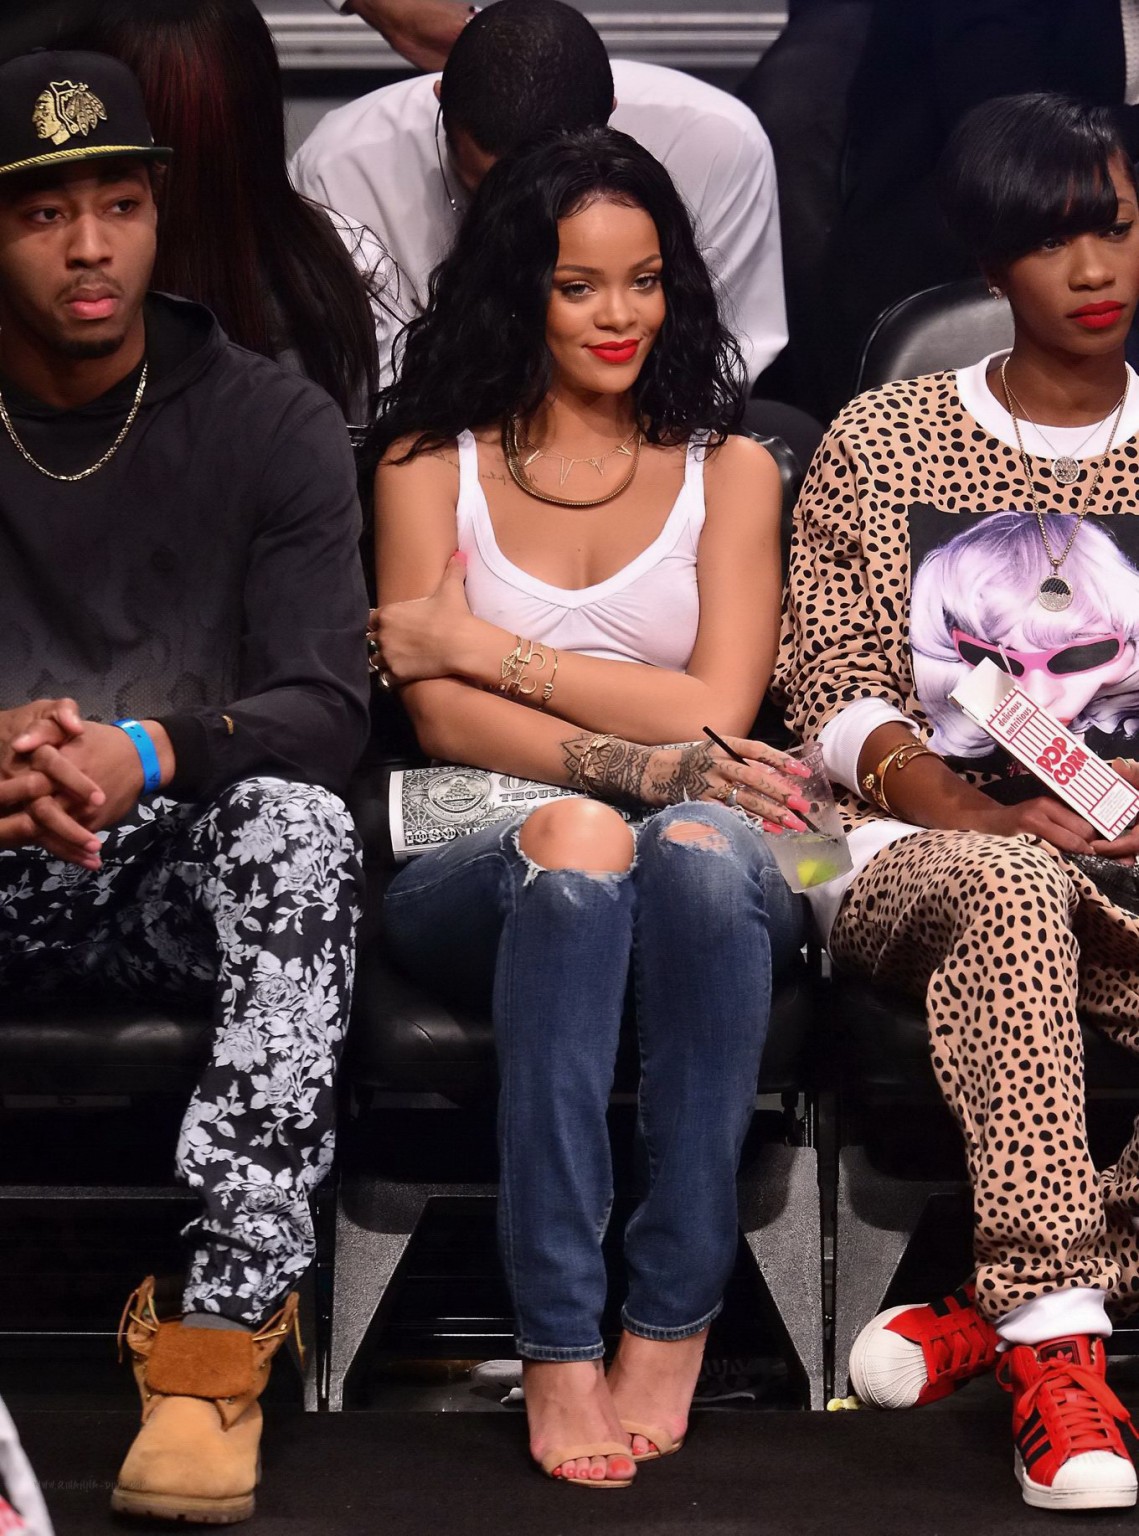 Rihanna shows off her boobs in seethru top at a basketball game in NYC #75198070